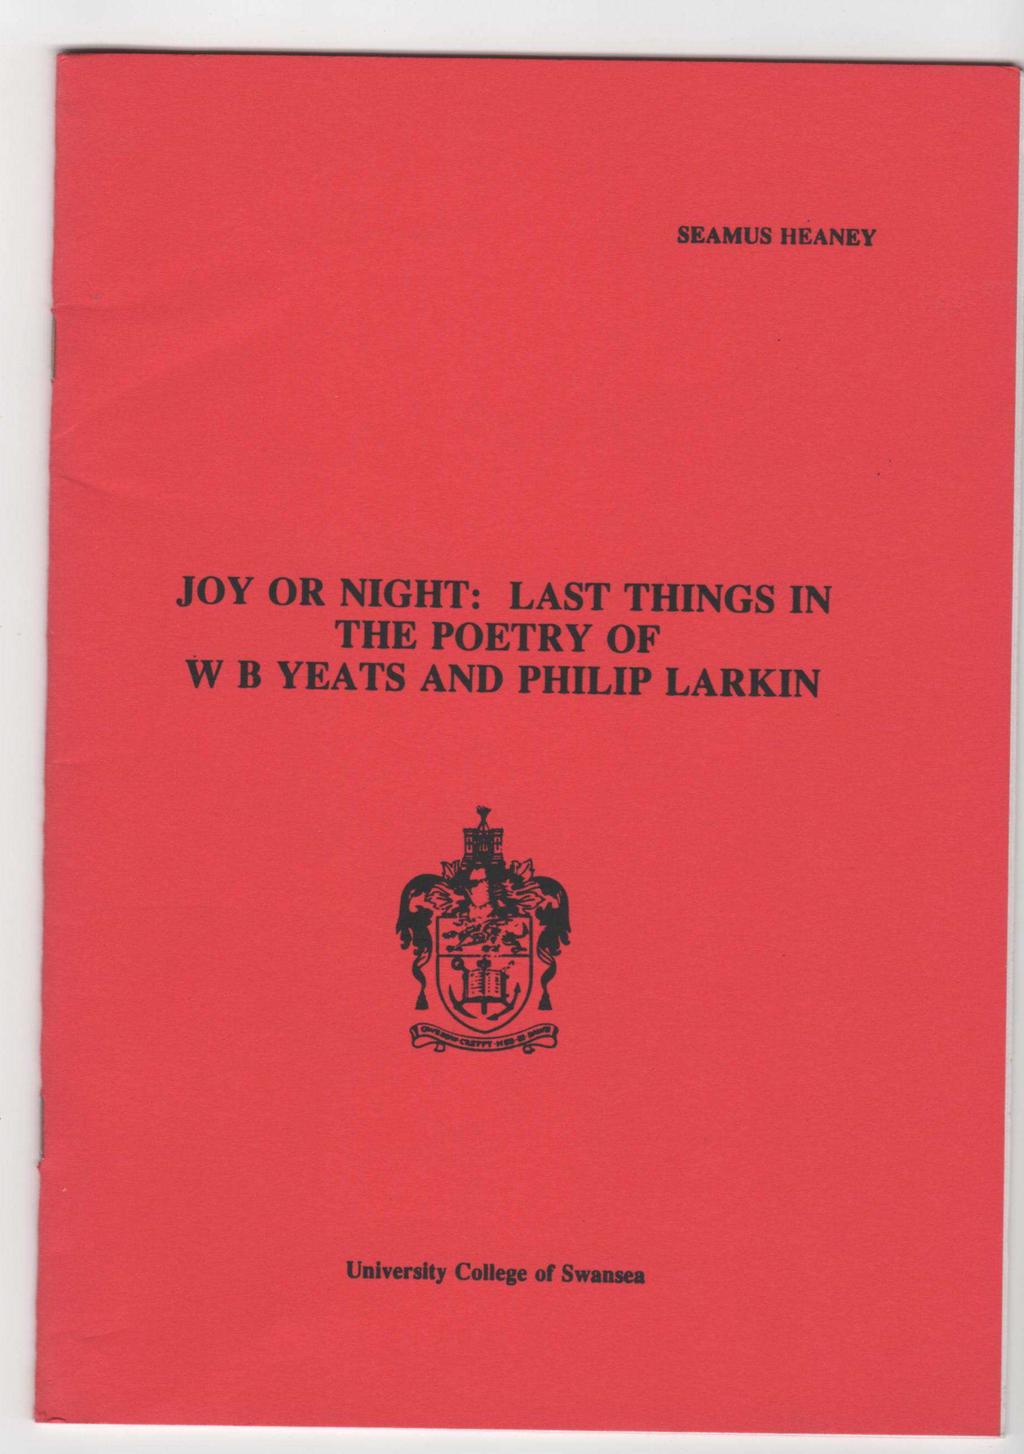 42. Heaney, Seamus. JOY OR NIGHT: Last Things in the Poetry of W B Yeats and Philip Larkin. Swansea: University College of Swansea, 1993. First Edition. Stapled red wrappers; small 8vo. 22 pp.